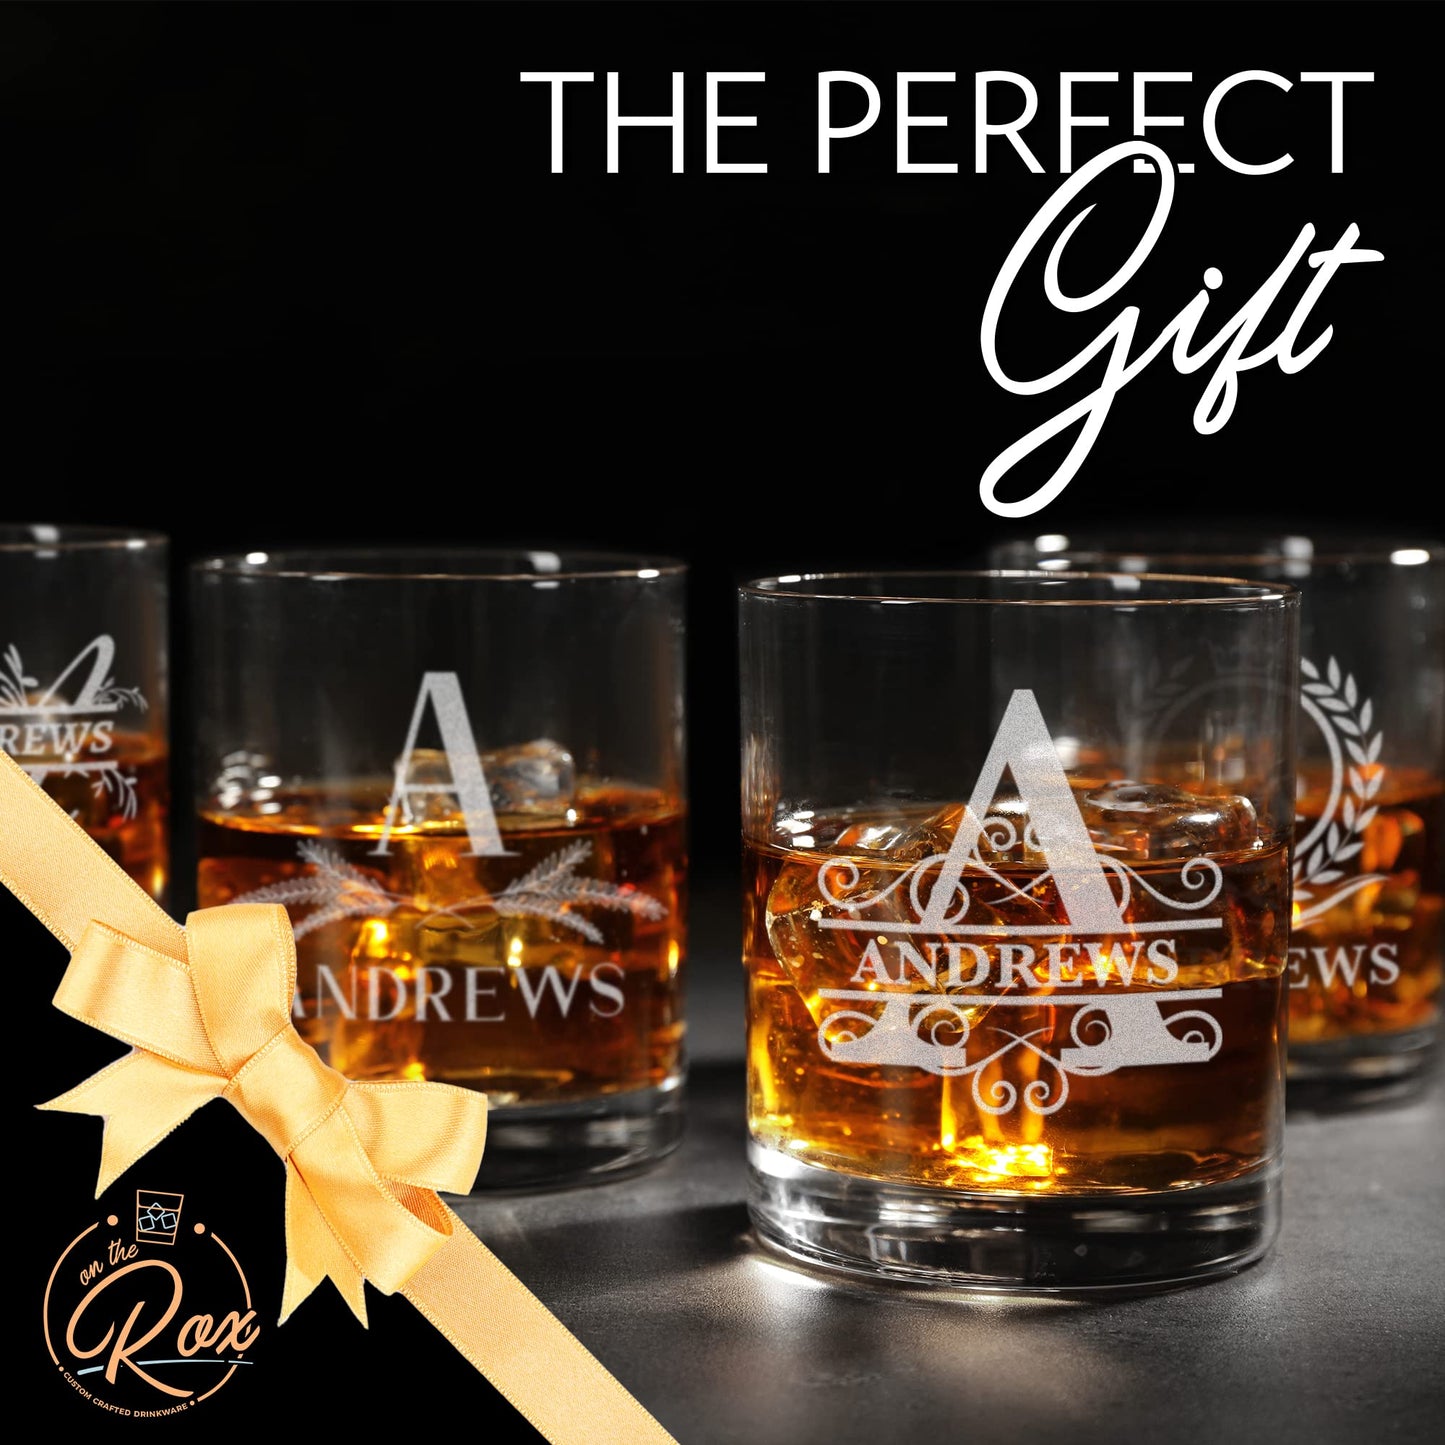 On The Rox Drinks Personalized Whiskey, Bourbon Glass Gifts for Men - 11 oz Engraved Name Monogram Scotch Glass Set of 4 - Customized Cocktail, Rocks, Brandy Glass